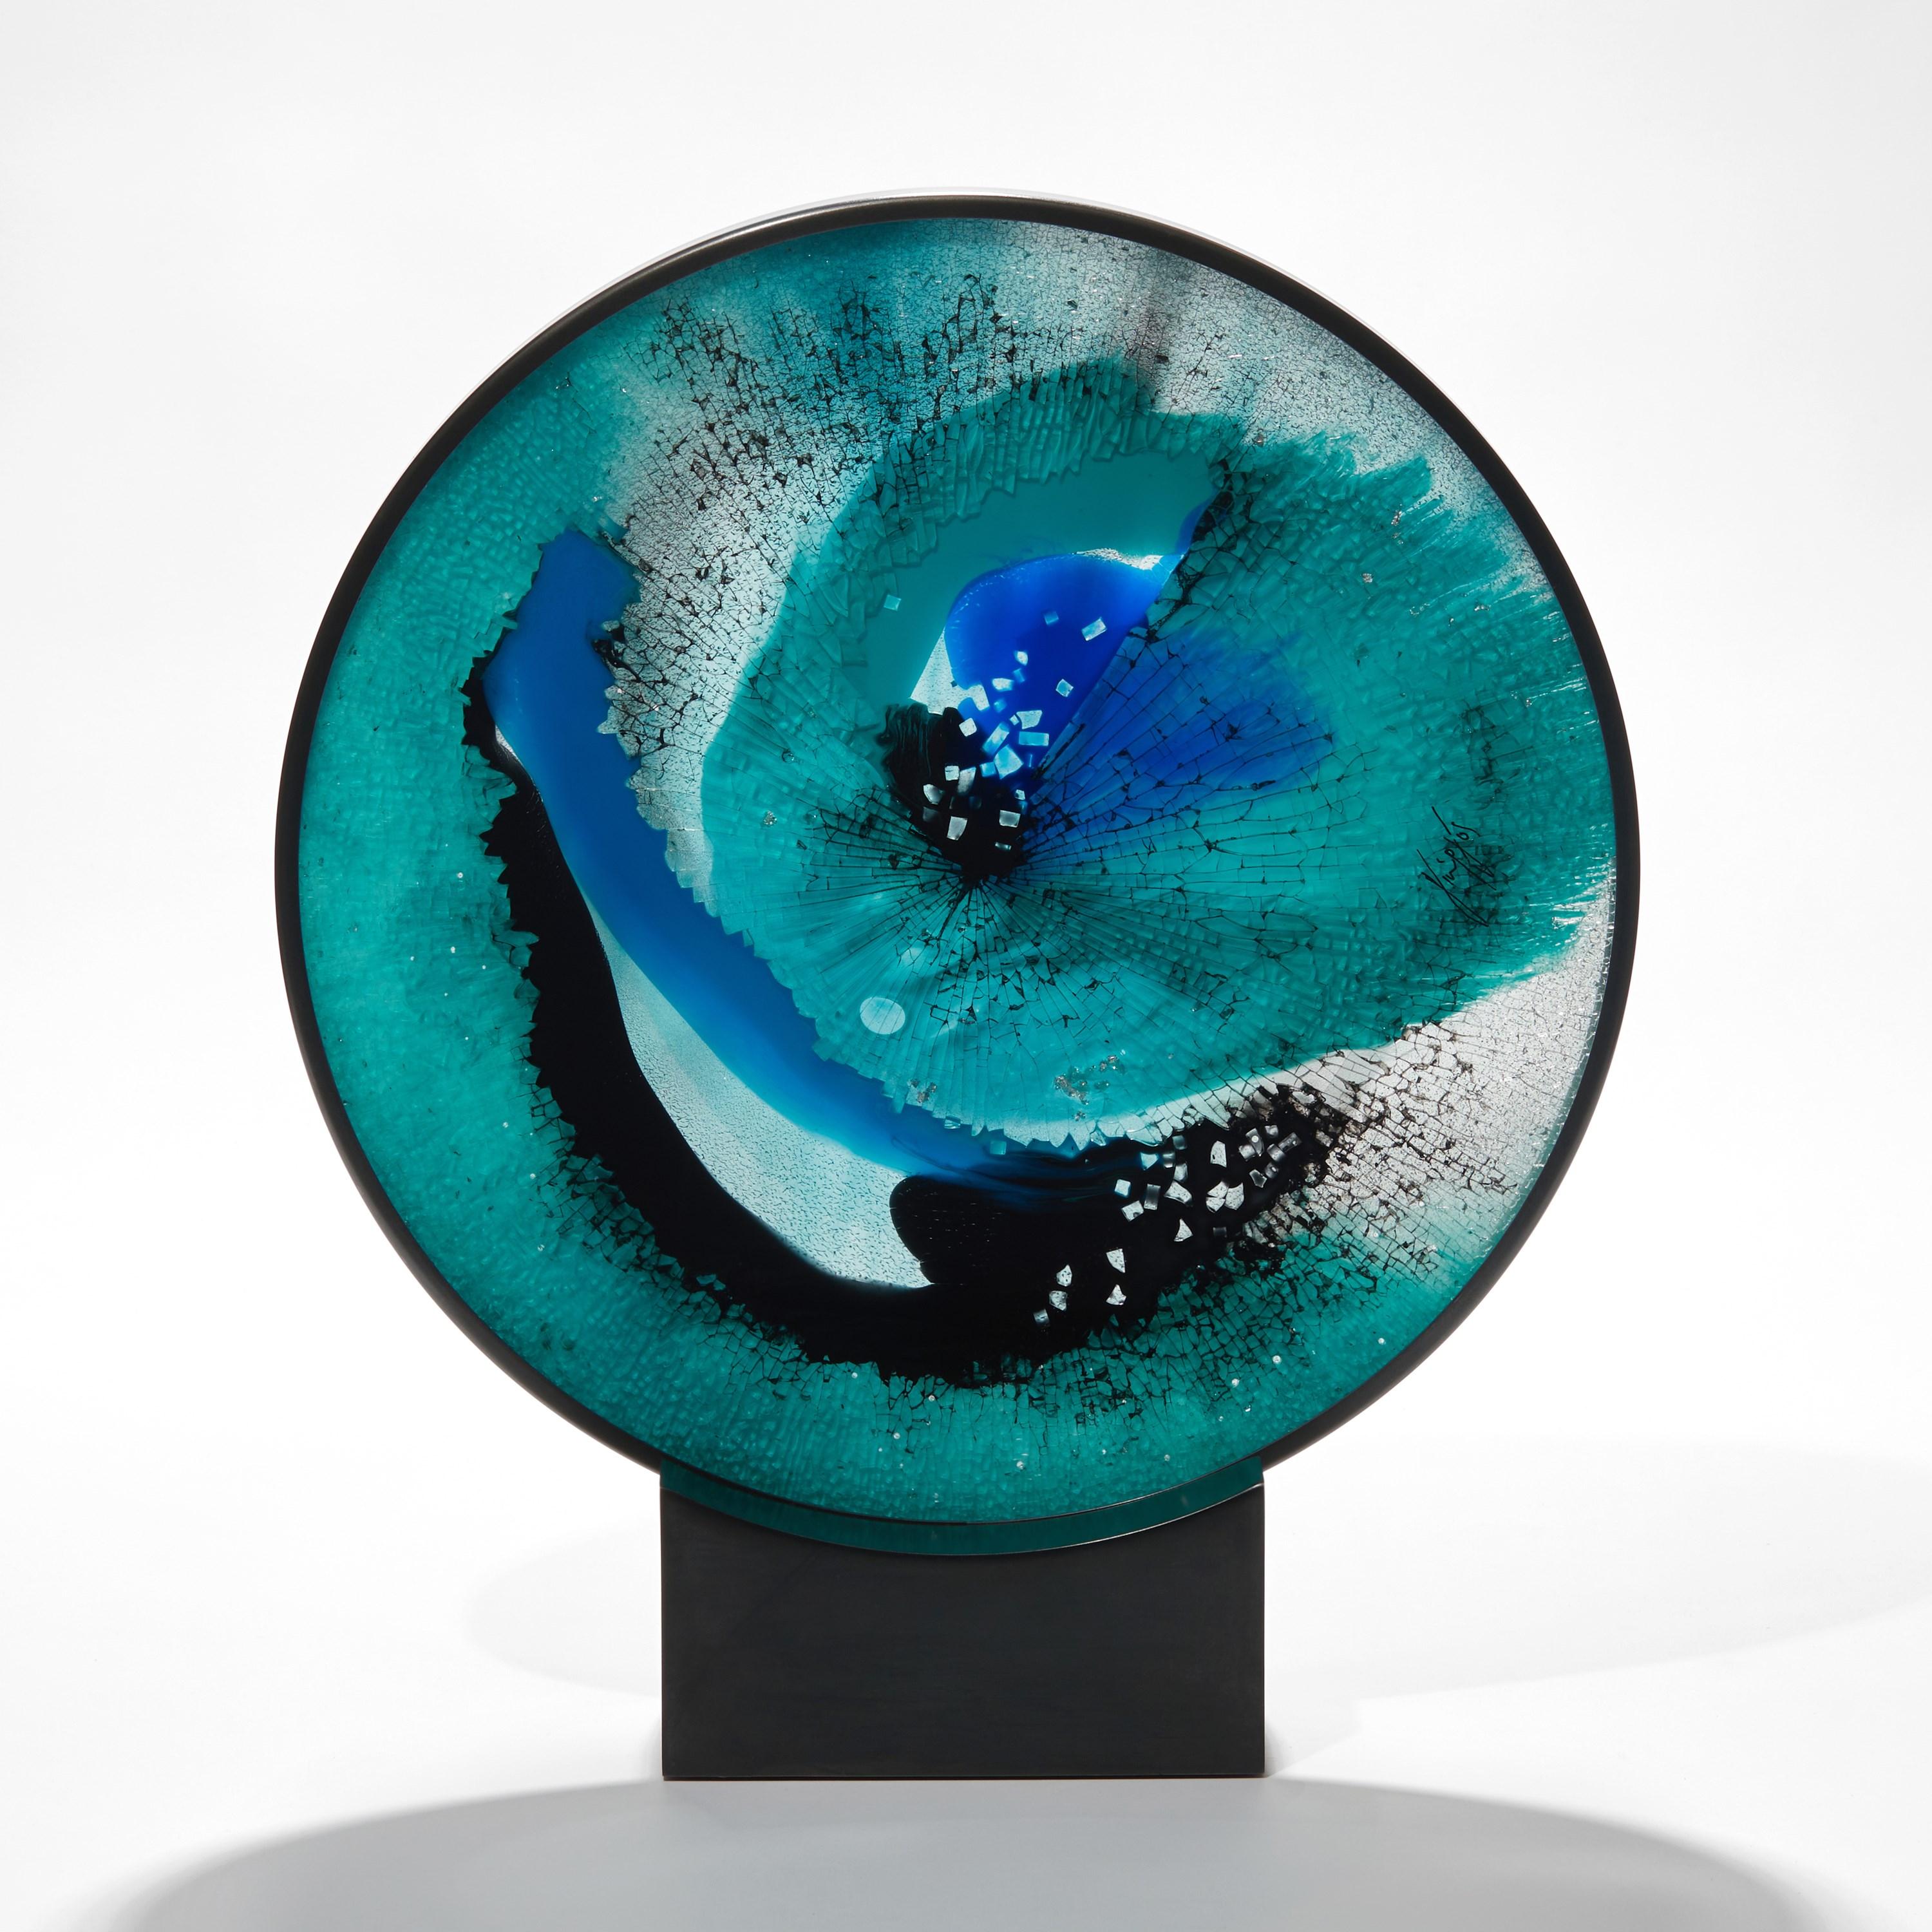 ‘Eye of Discovery’ is a unique sculpture by the Cypriot artist, Yorgos Papadopoulos, created from glass, silicone and pigments with a hematite patinated steel bezel and stand.

Papadopoulos has reworked the iconic 'Evil Eye' amulet with his